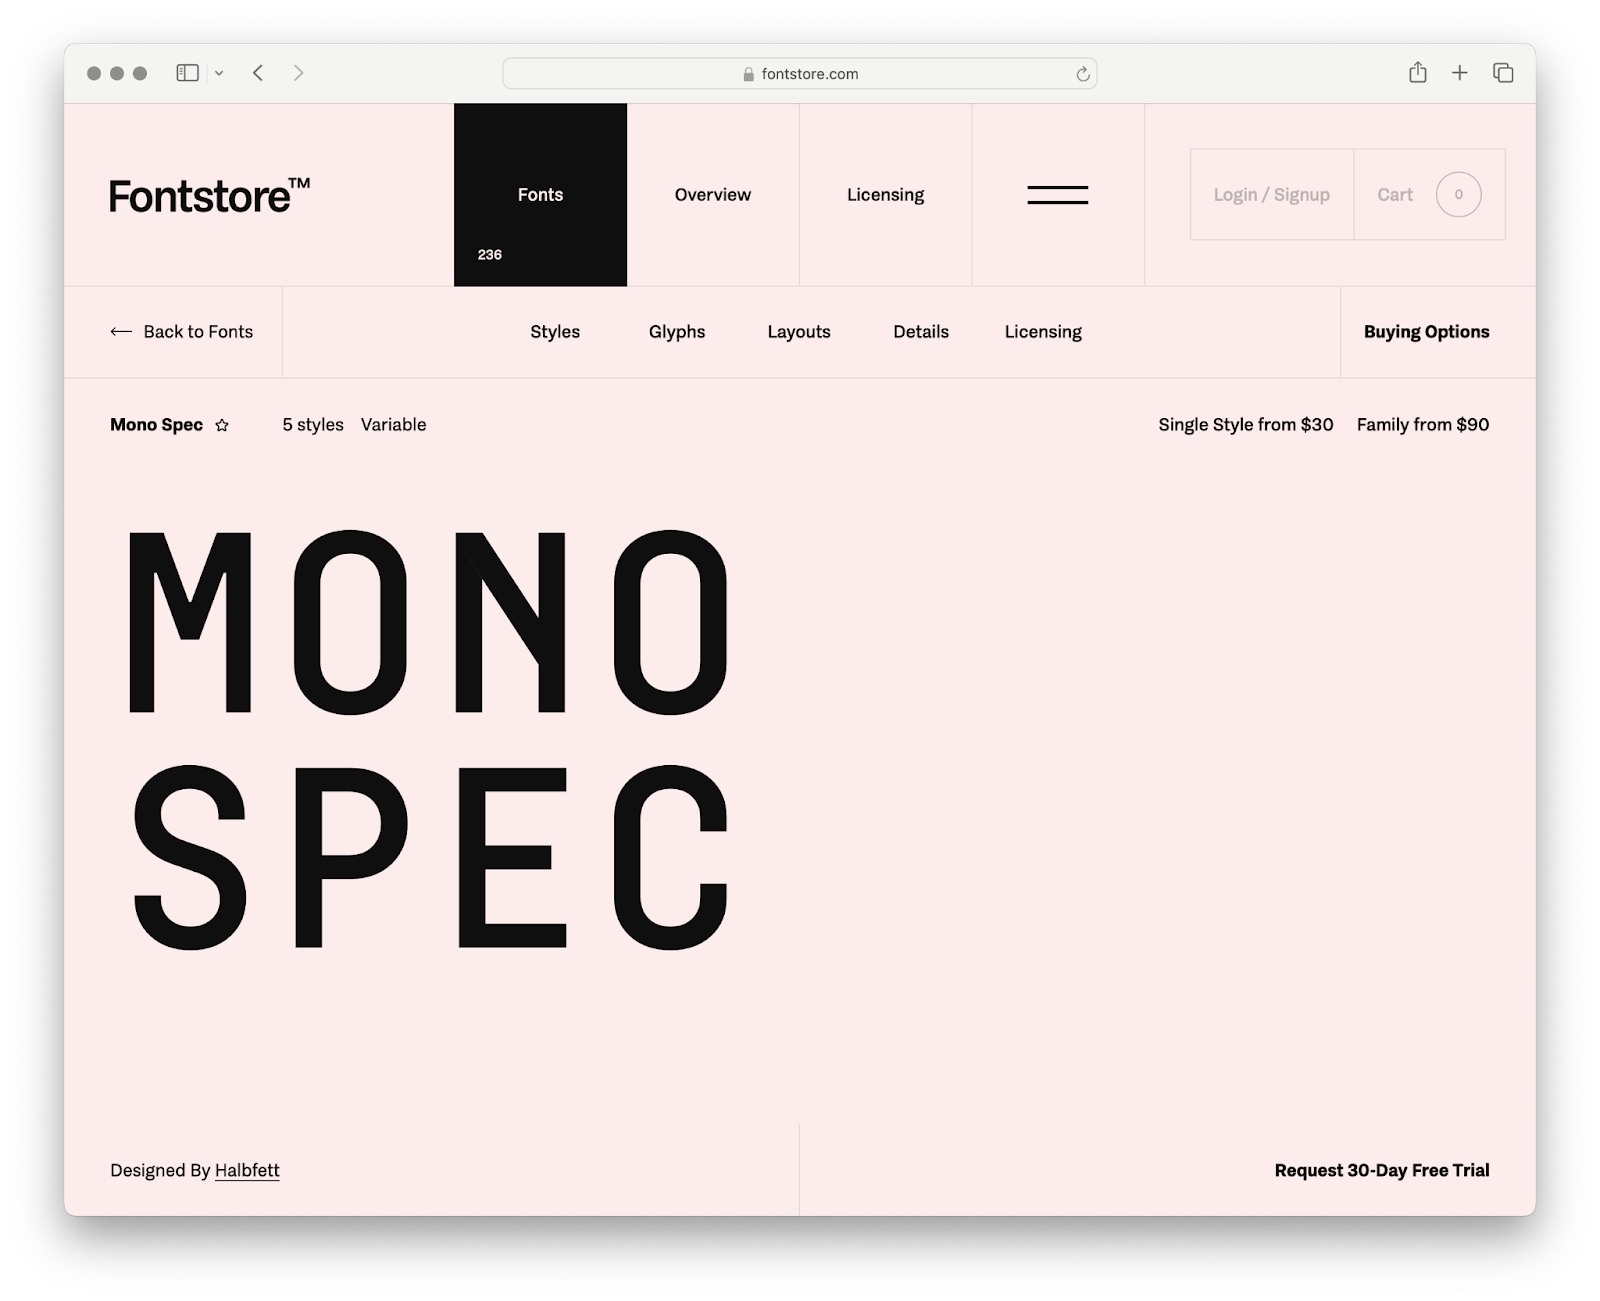 Artifact from the Mono-Spec: A Typeface Melding Industrial Charm and Versatility article on Abduzeedo